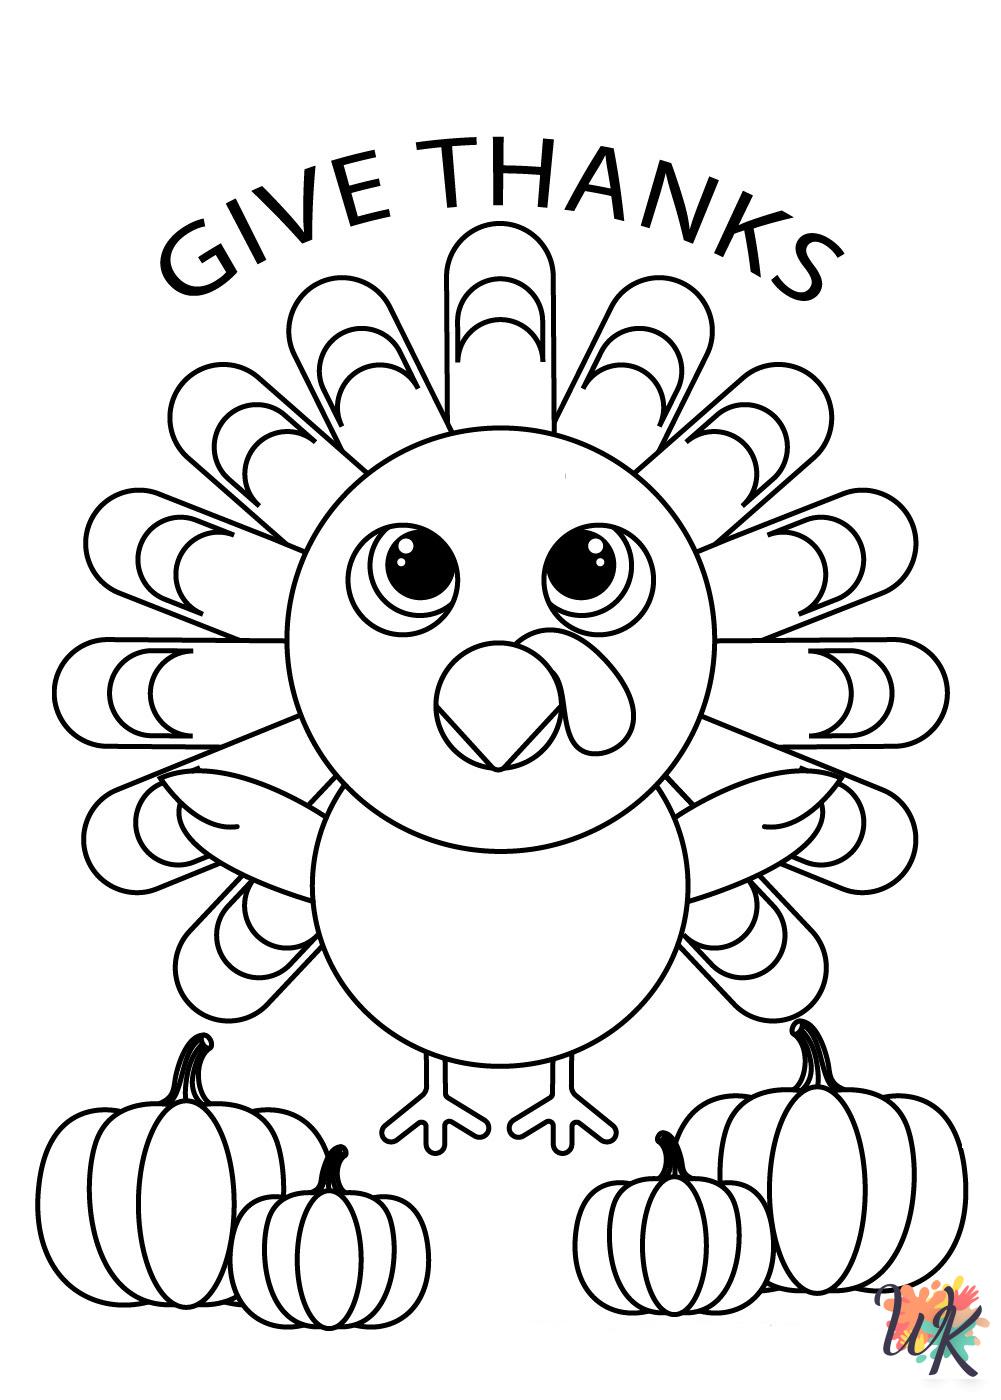 Thanksgiving coloring pages for adults pdf